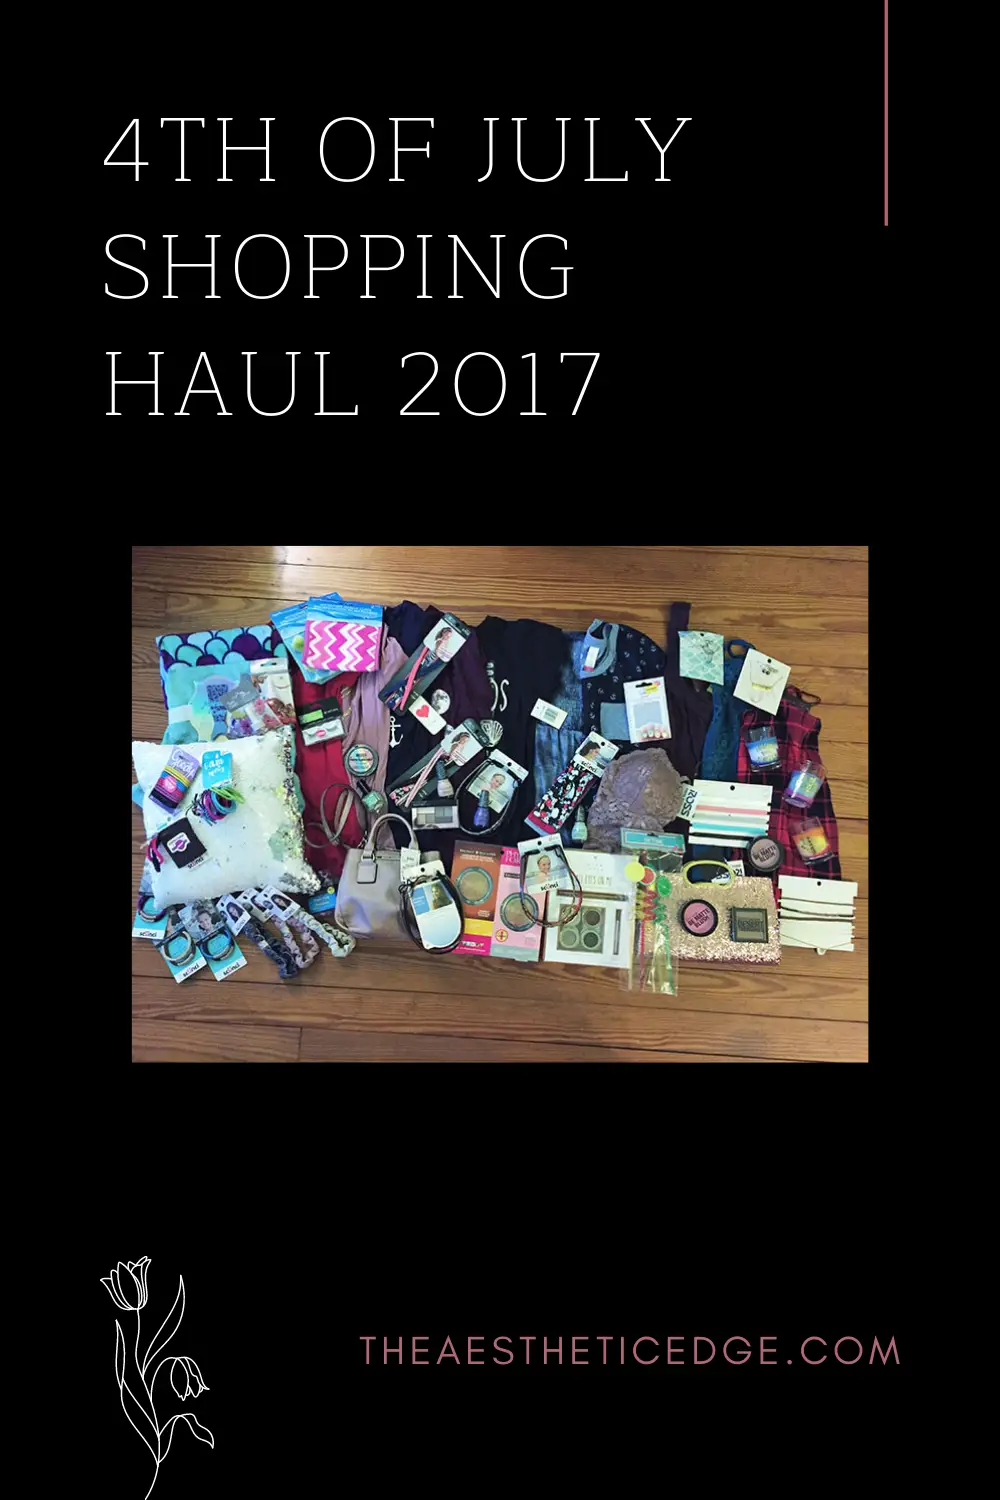 4th of july shopping haul 2017